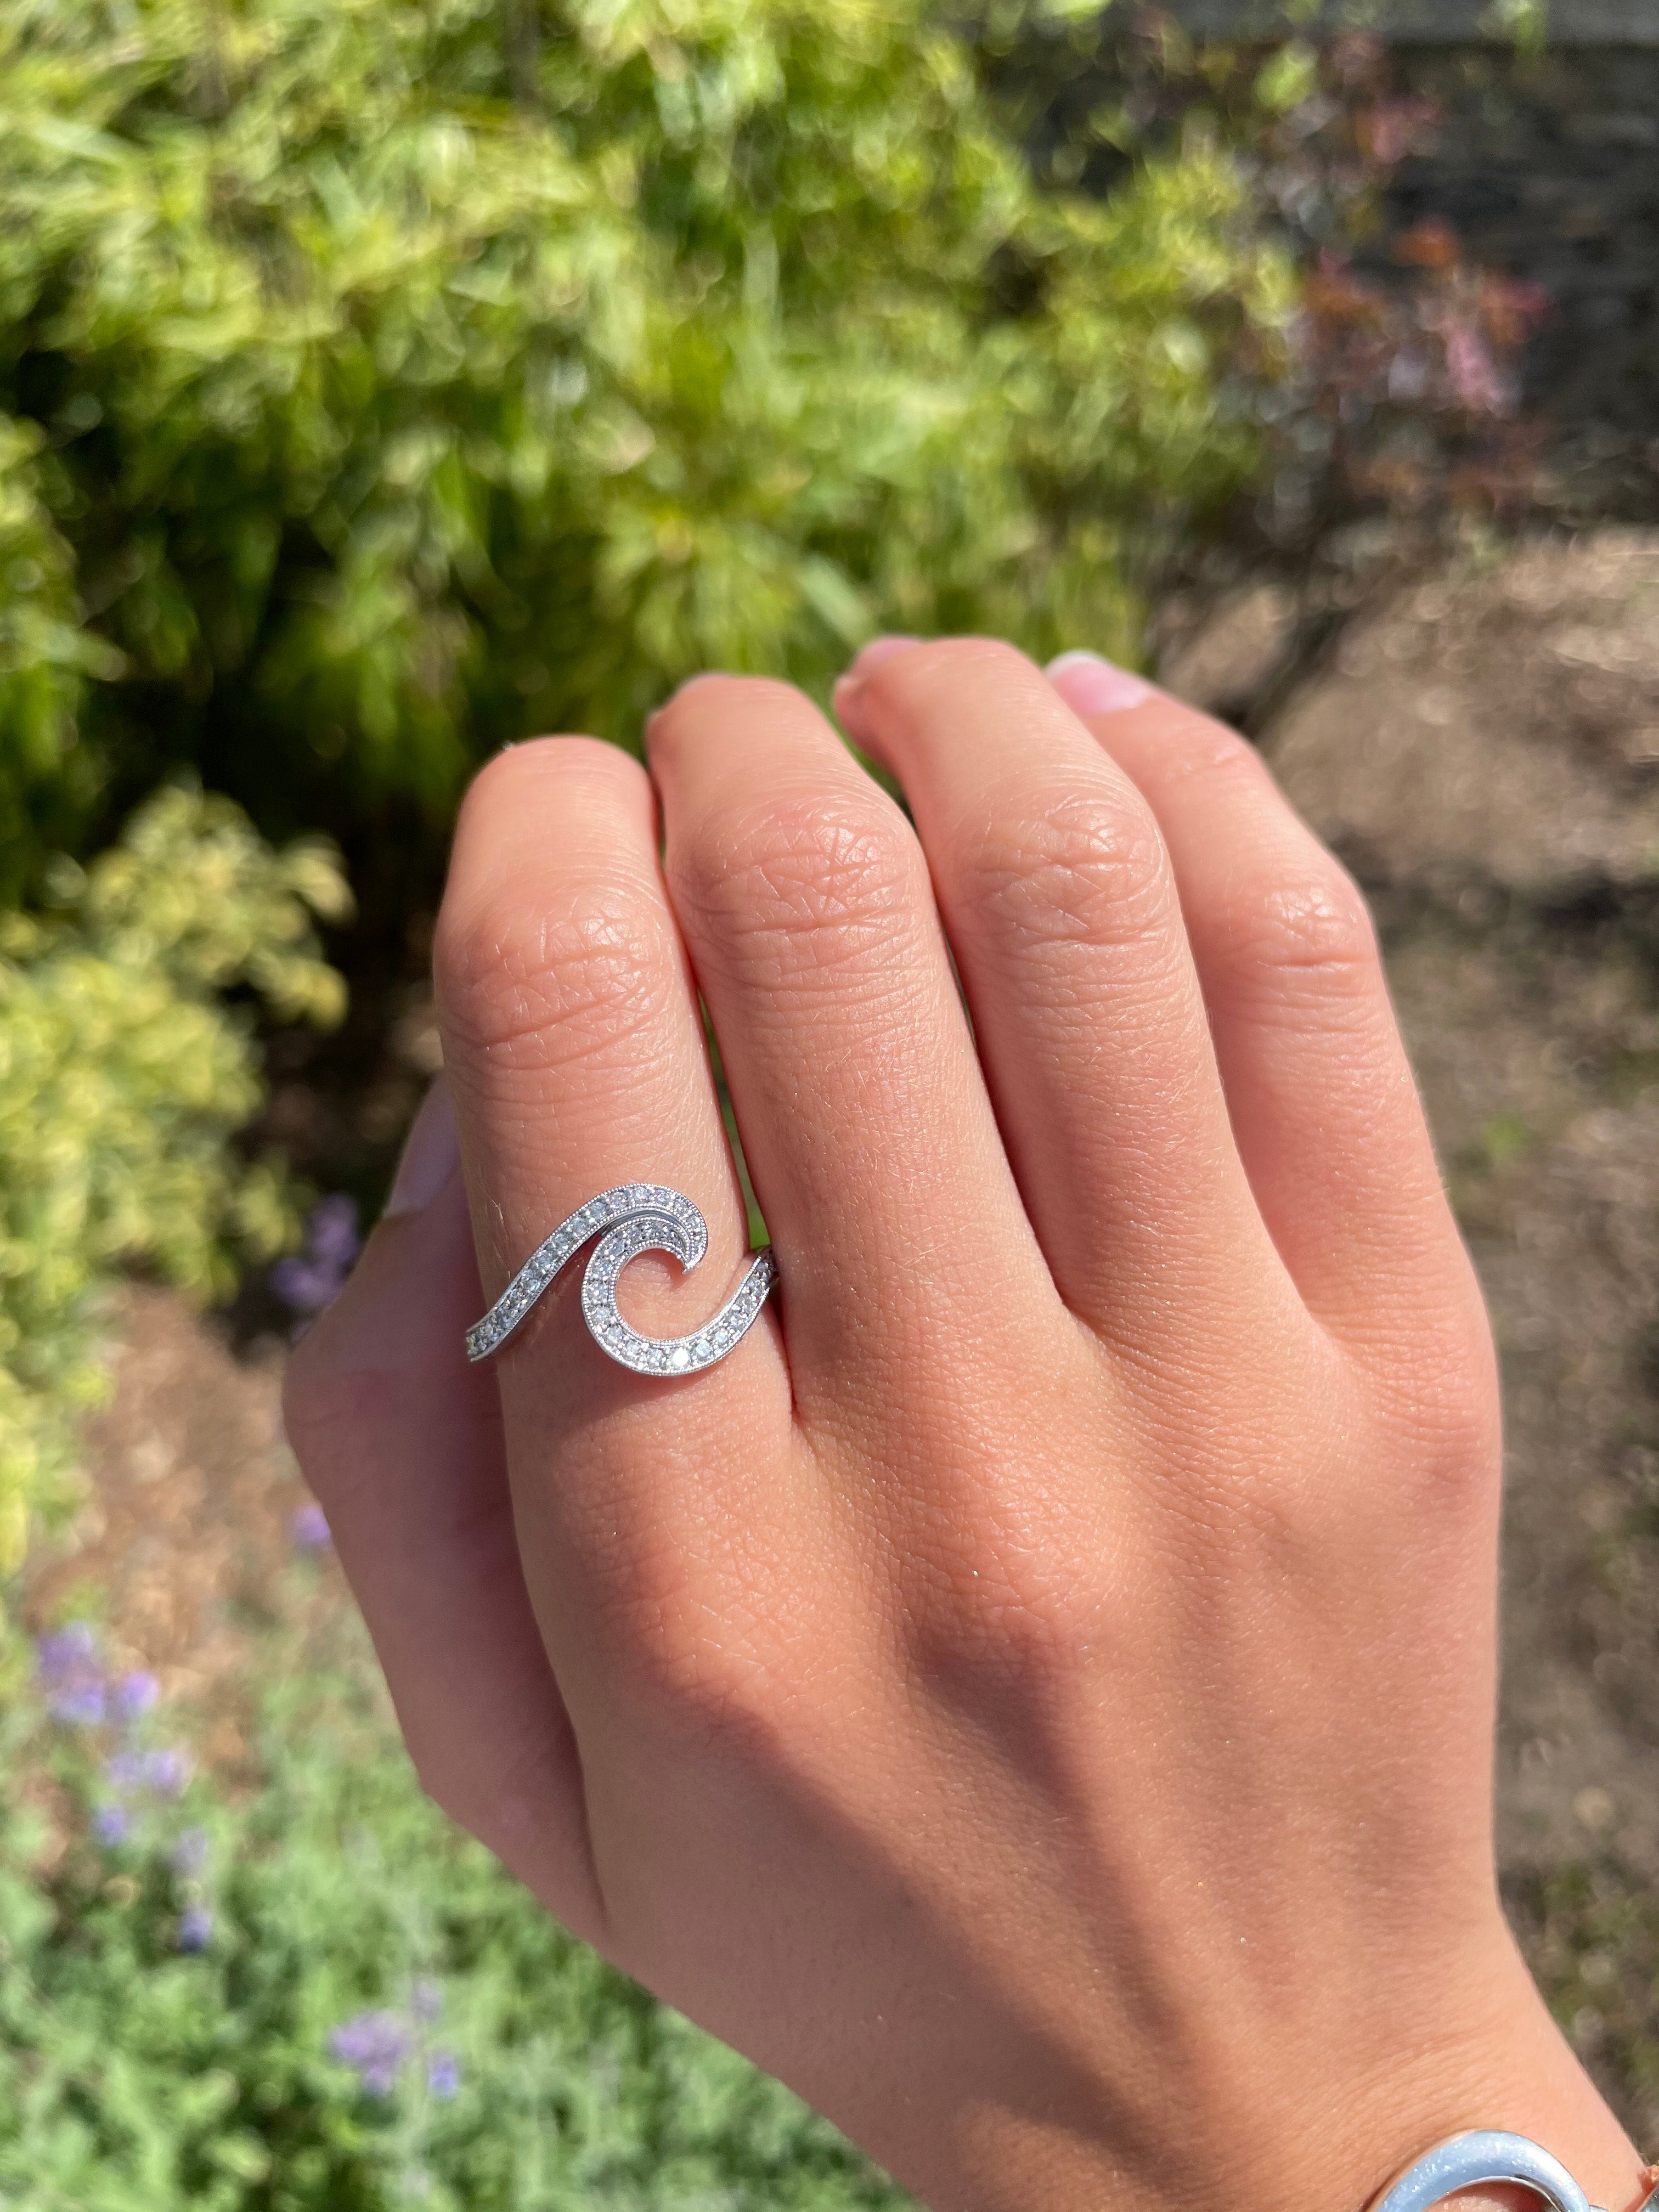 Amazon.com: 14K Gold Filled Wave Ring/surf ring/ocean wave ring/ocean ring/surfer  girl ring/stacking rings/minimalist jewelry/beach jewelry/silver wave ring/gold  wave ring/925 Sterling Silver/14K Rose Gold Filled : Handmade Products